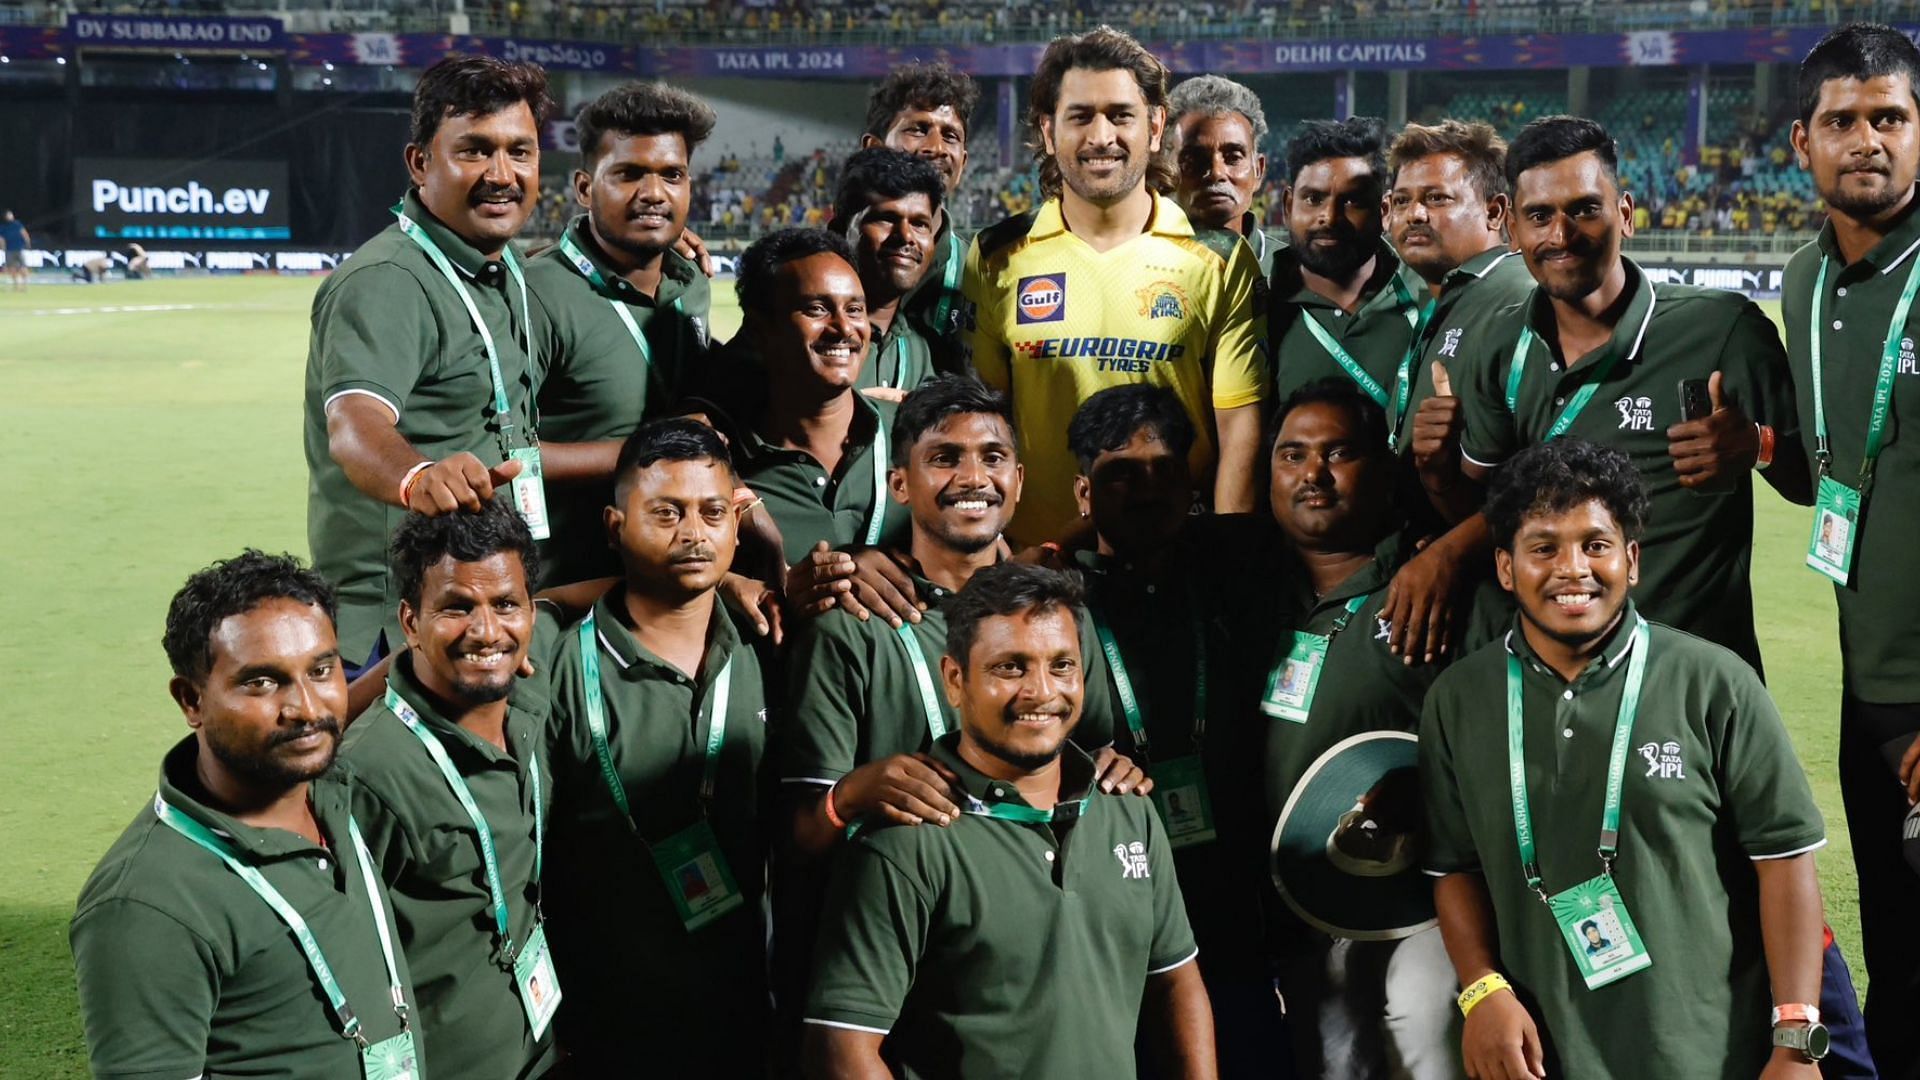 MS Dhoni posed with the groundstaff at Visakhapatnam